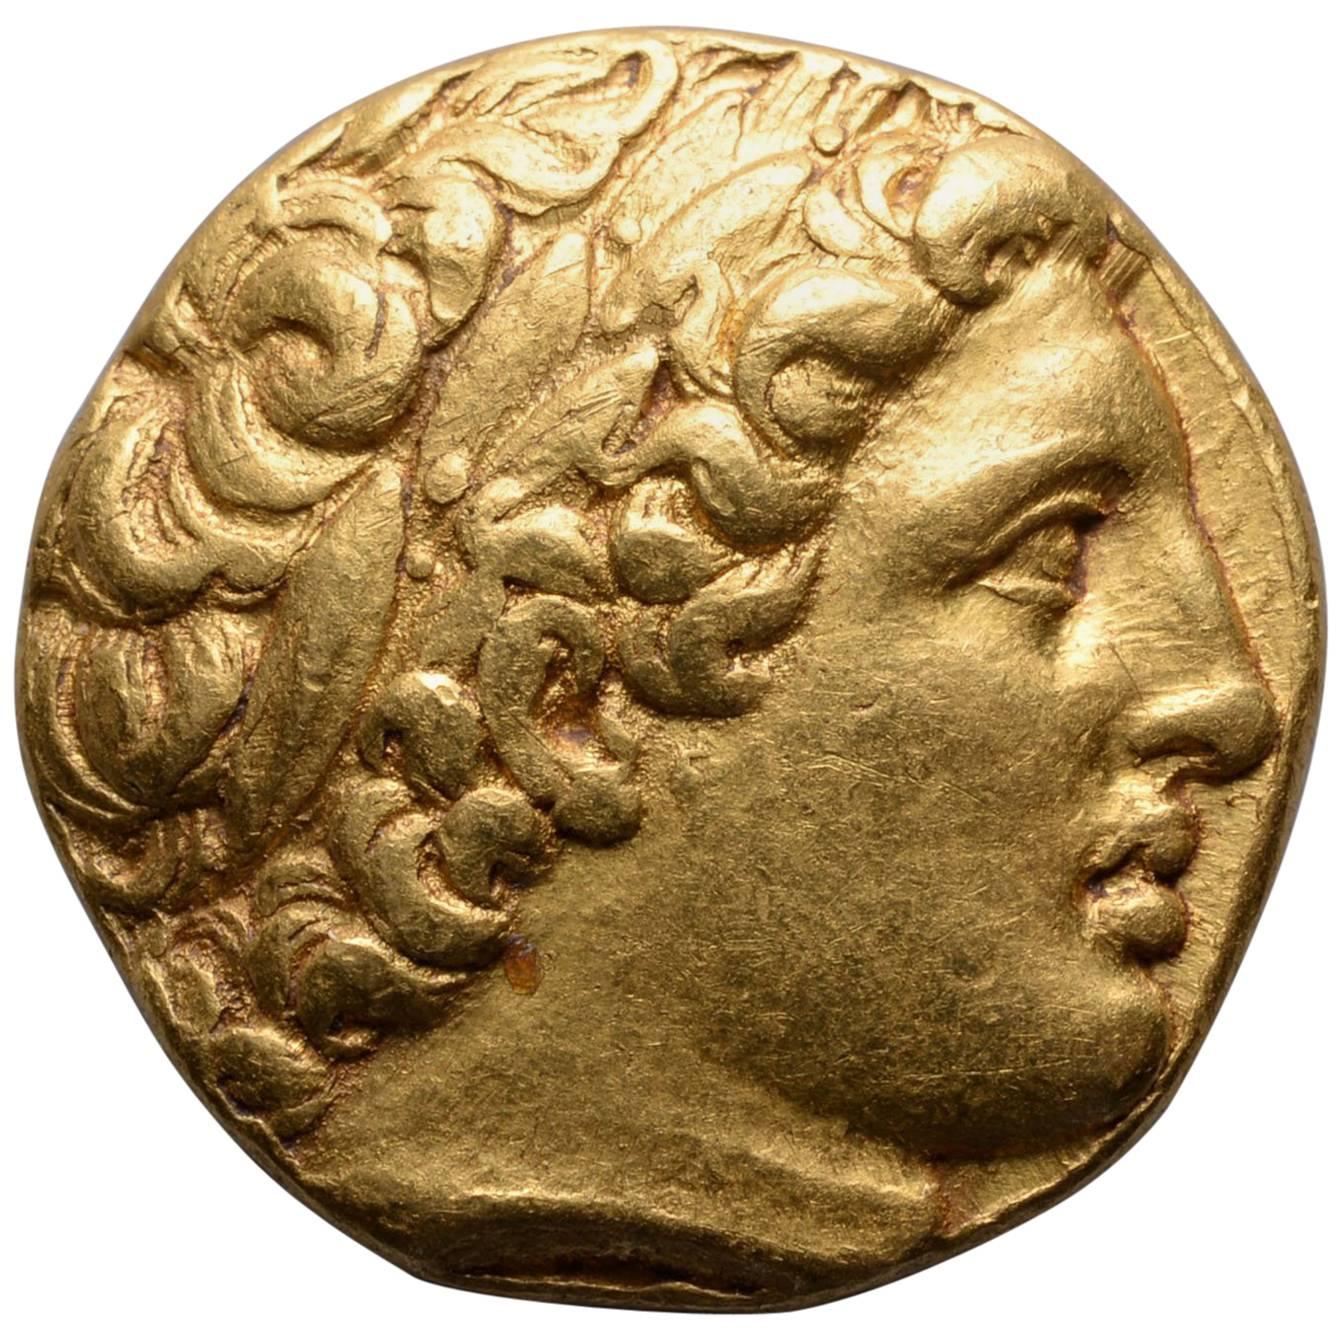 Ancient Greek Gold Coin of King Philip II of Macedon, 323 BC